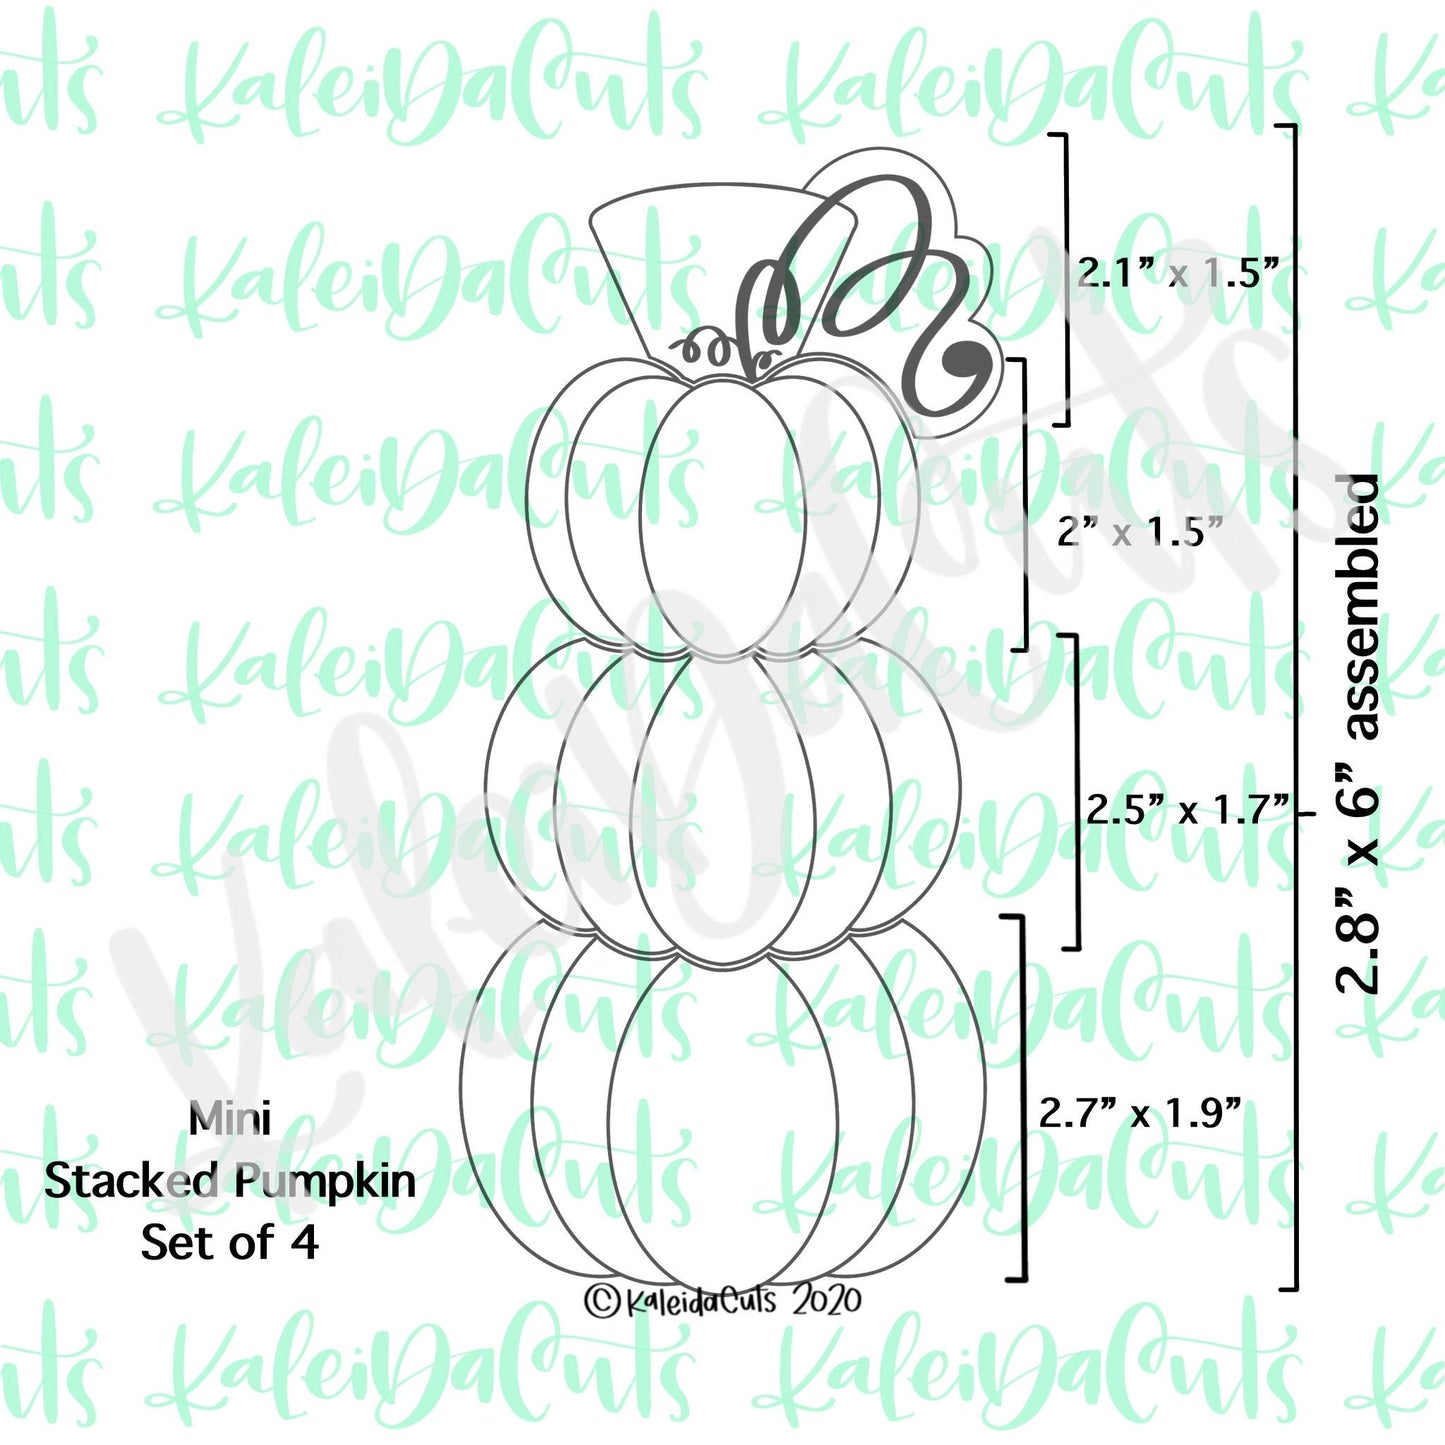 Stacked Pumpkin Set - 4 Cookie Cutters